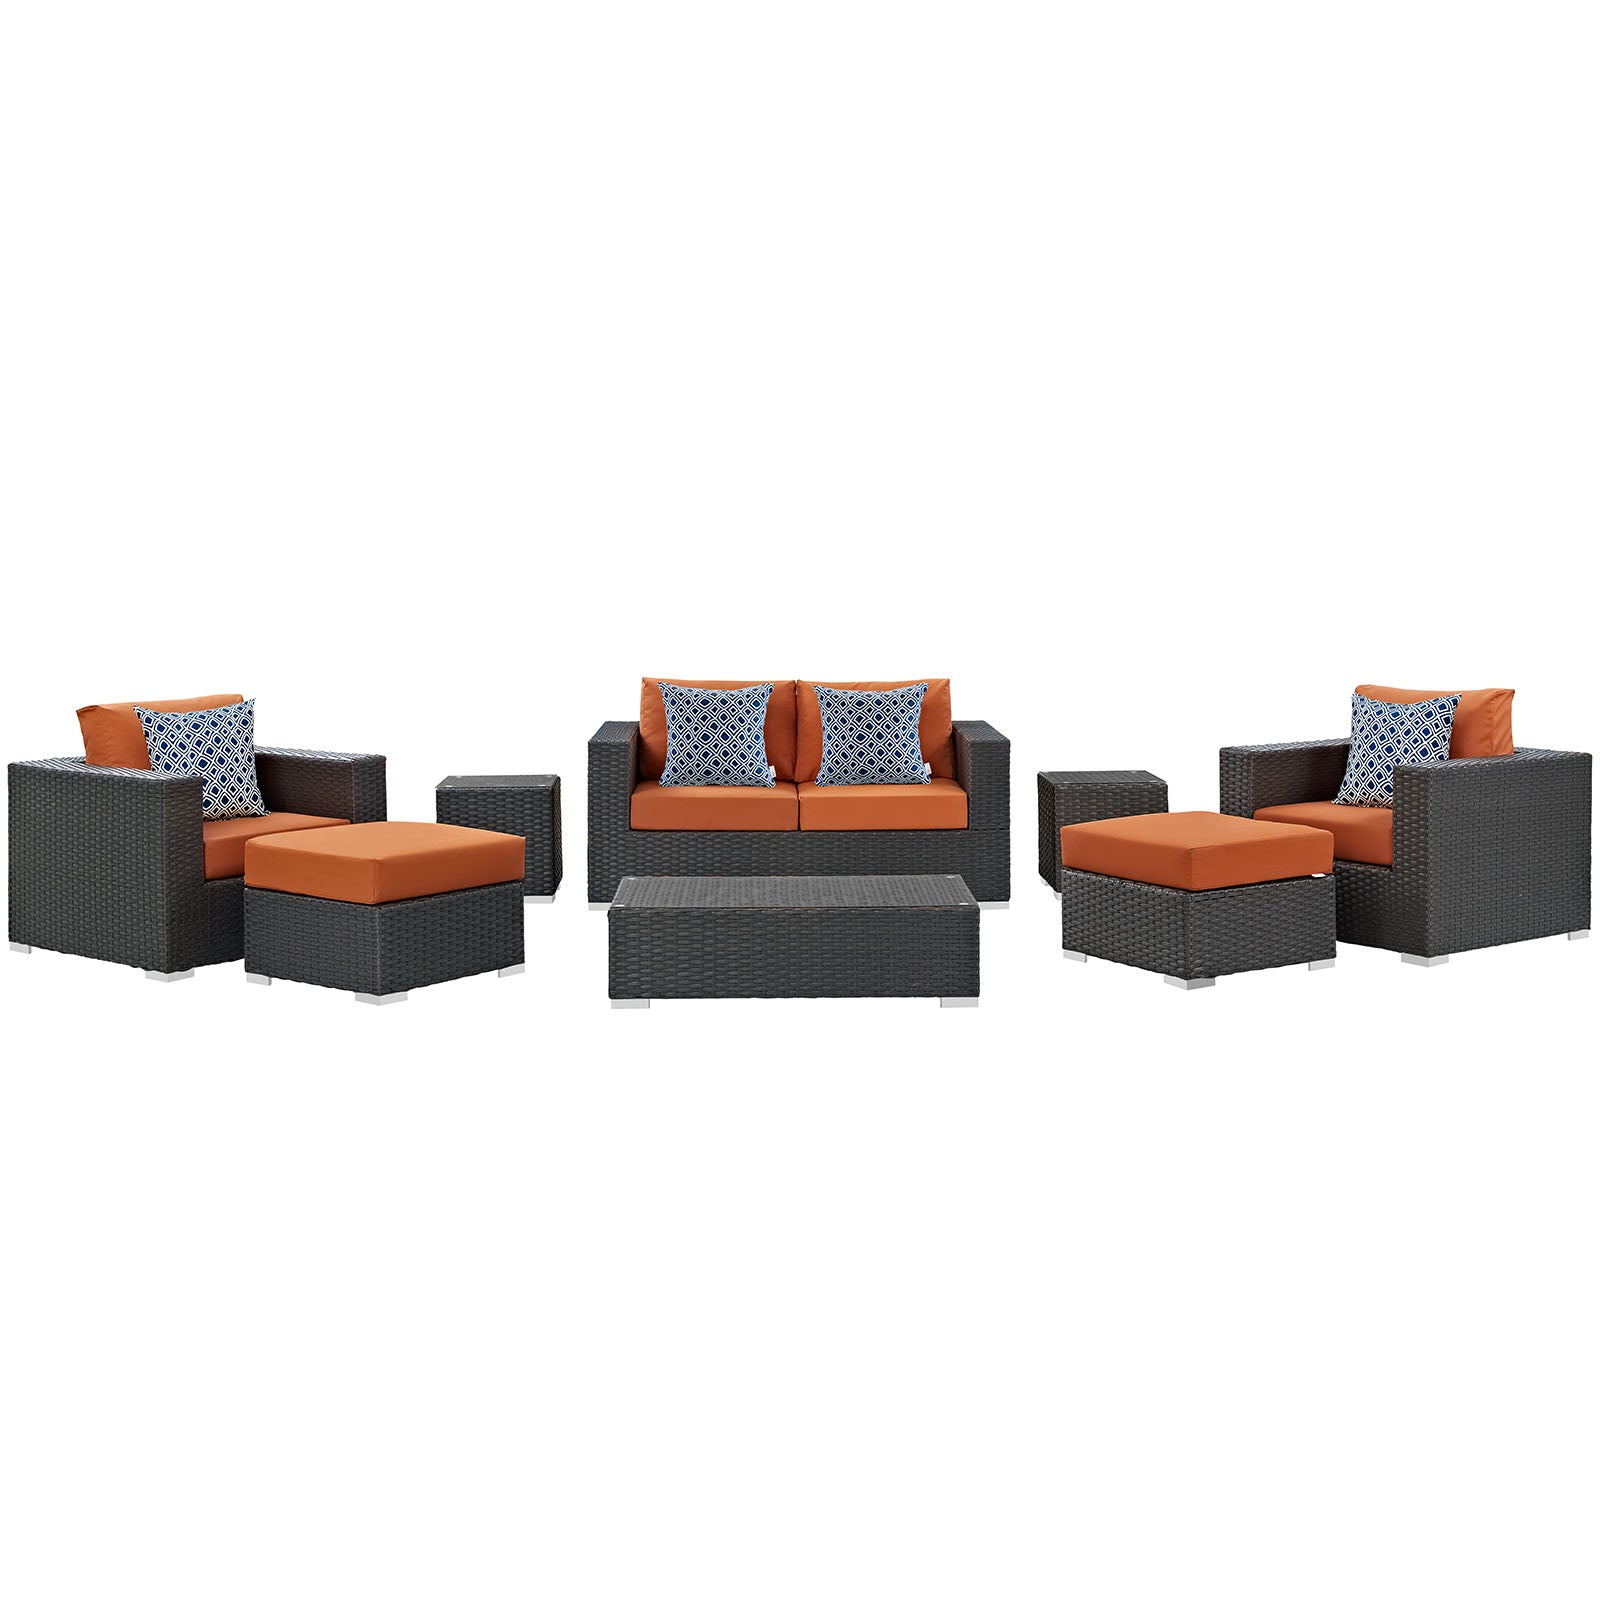 Modway Outdoor Conversation Sets - Sojourn 8 Piece Outdoor Patio Sunbrella Sectional Set Canvas Tuscan